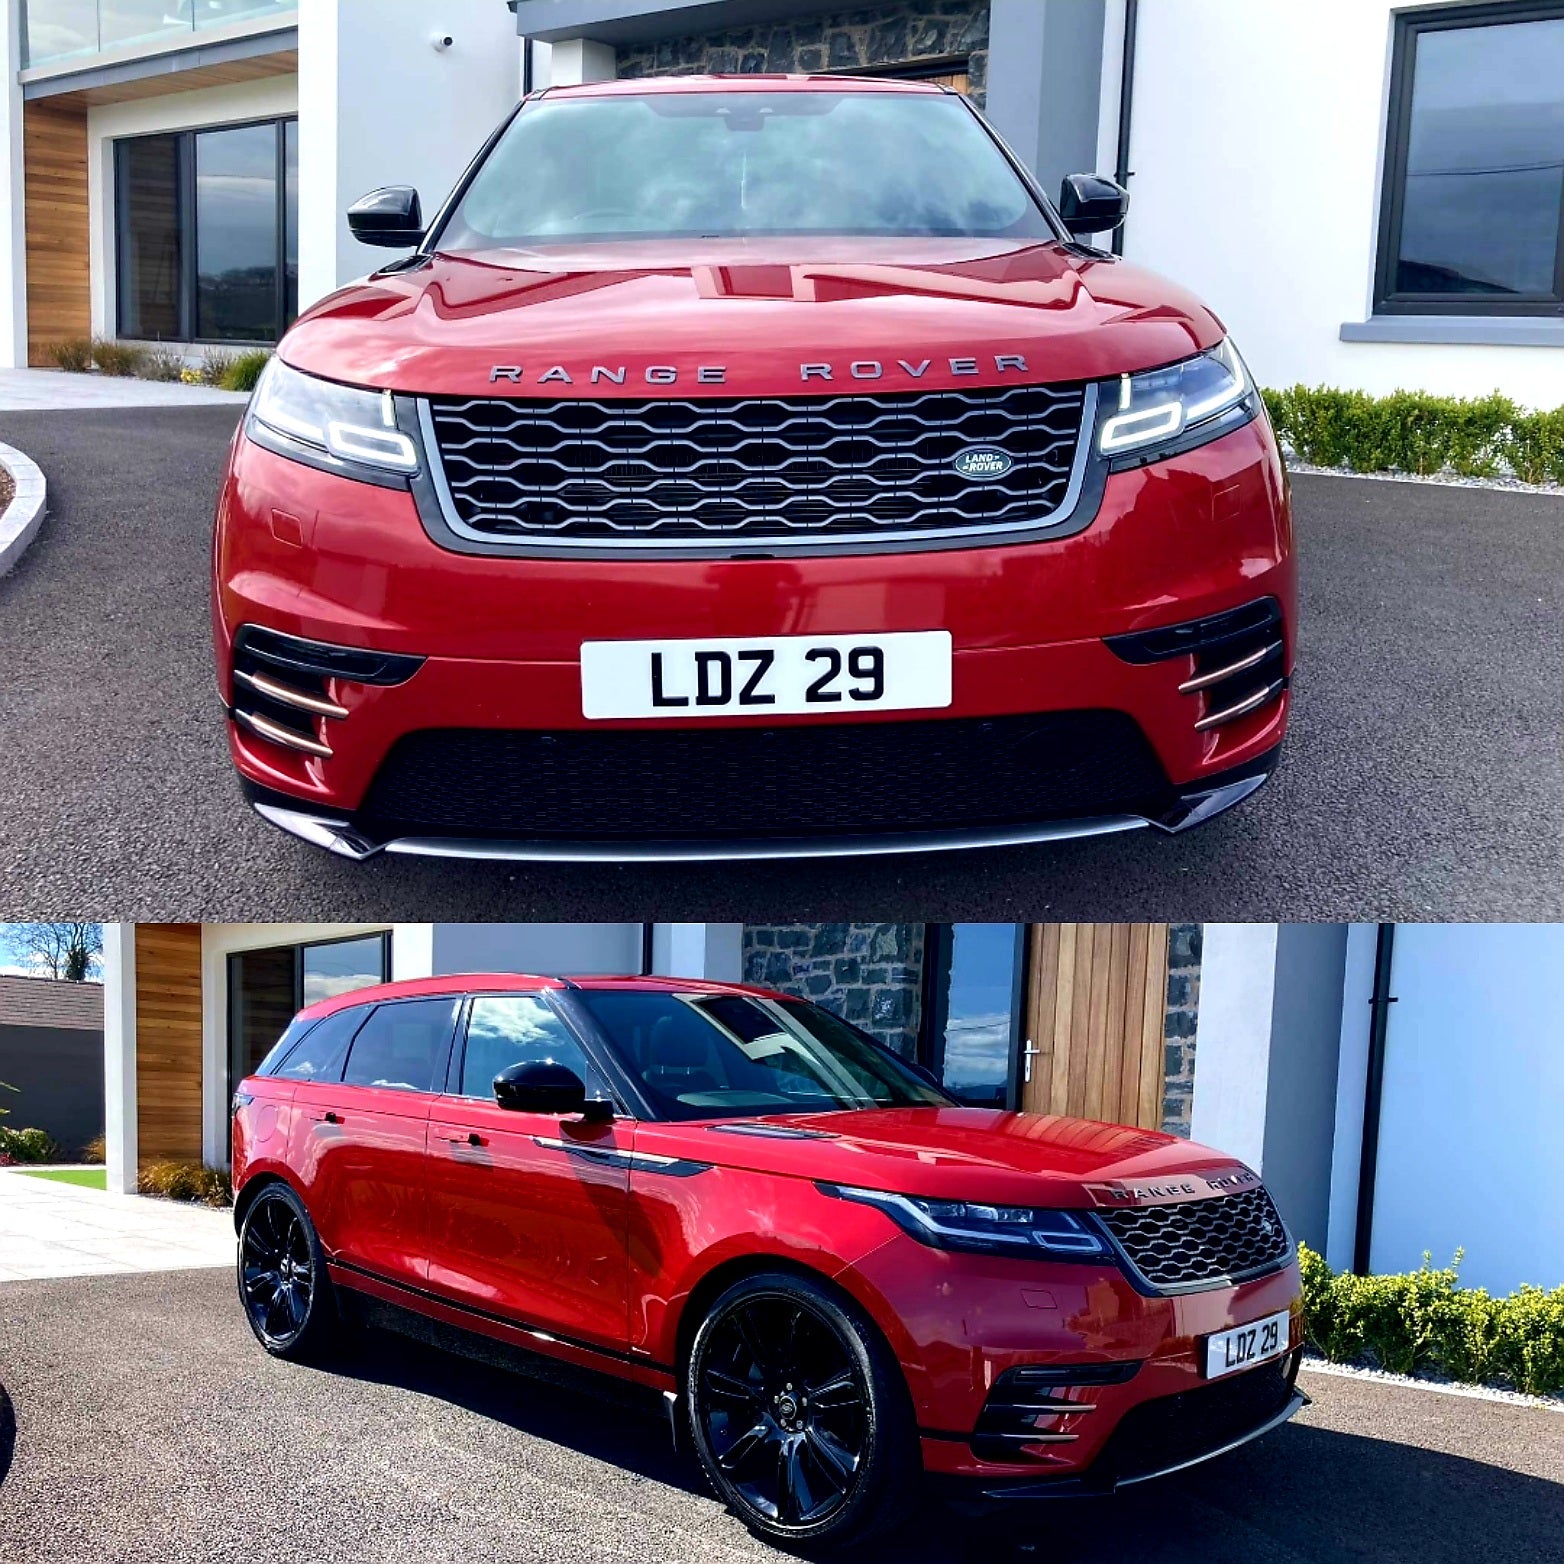 Range rover velar with LDZ 29 2 digit ni number plate from In2Registrations